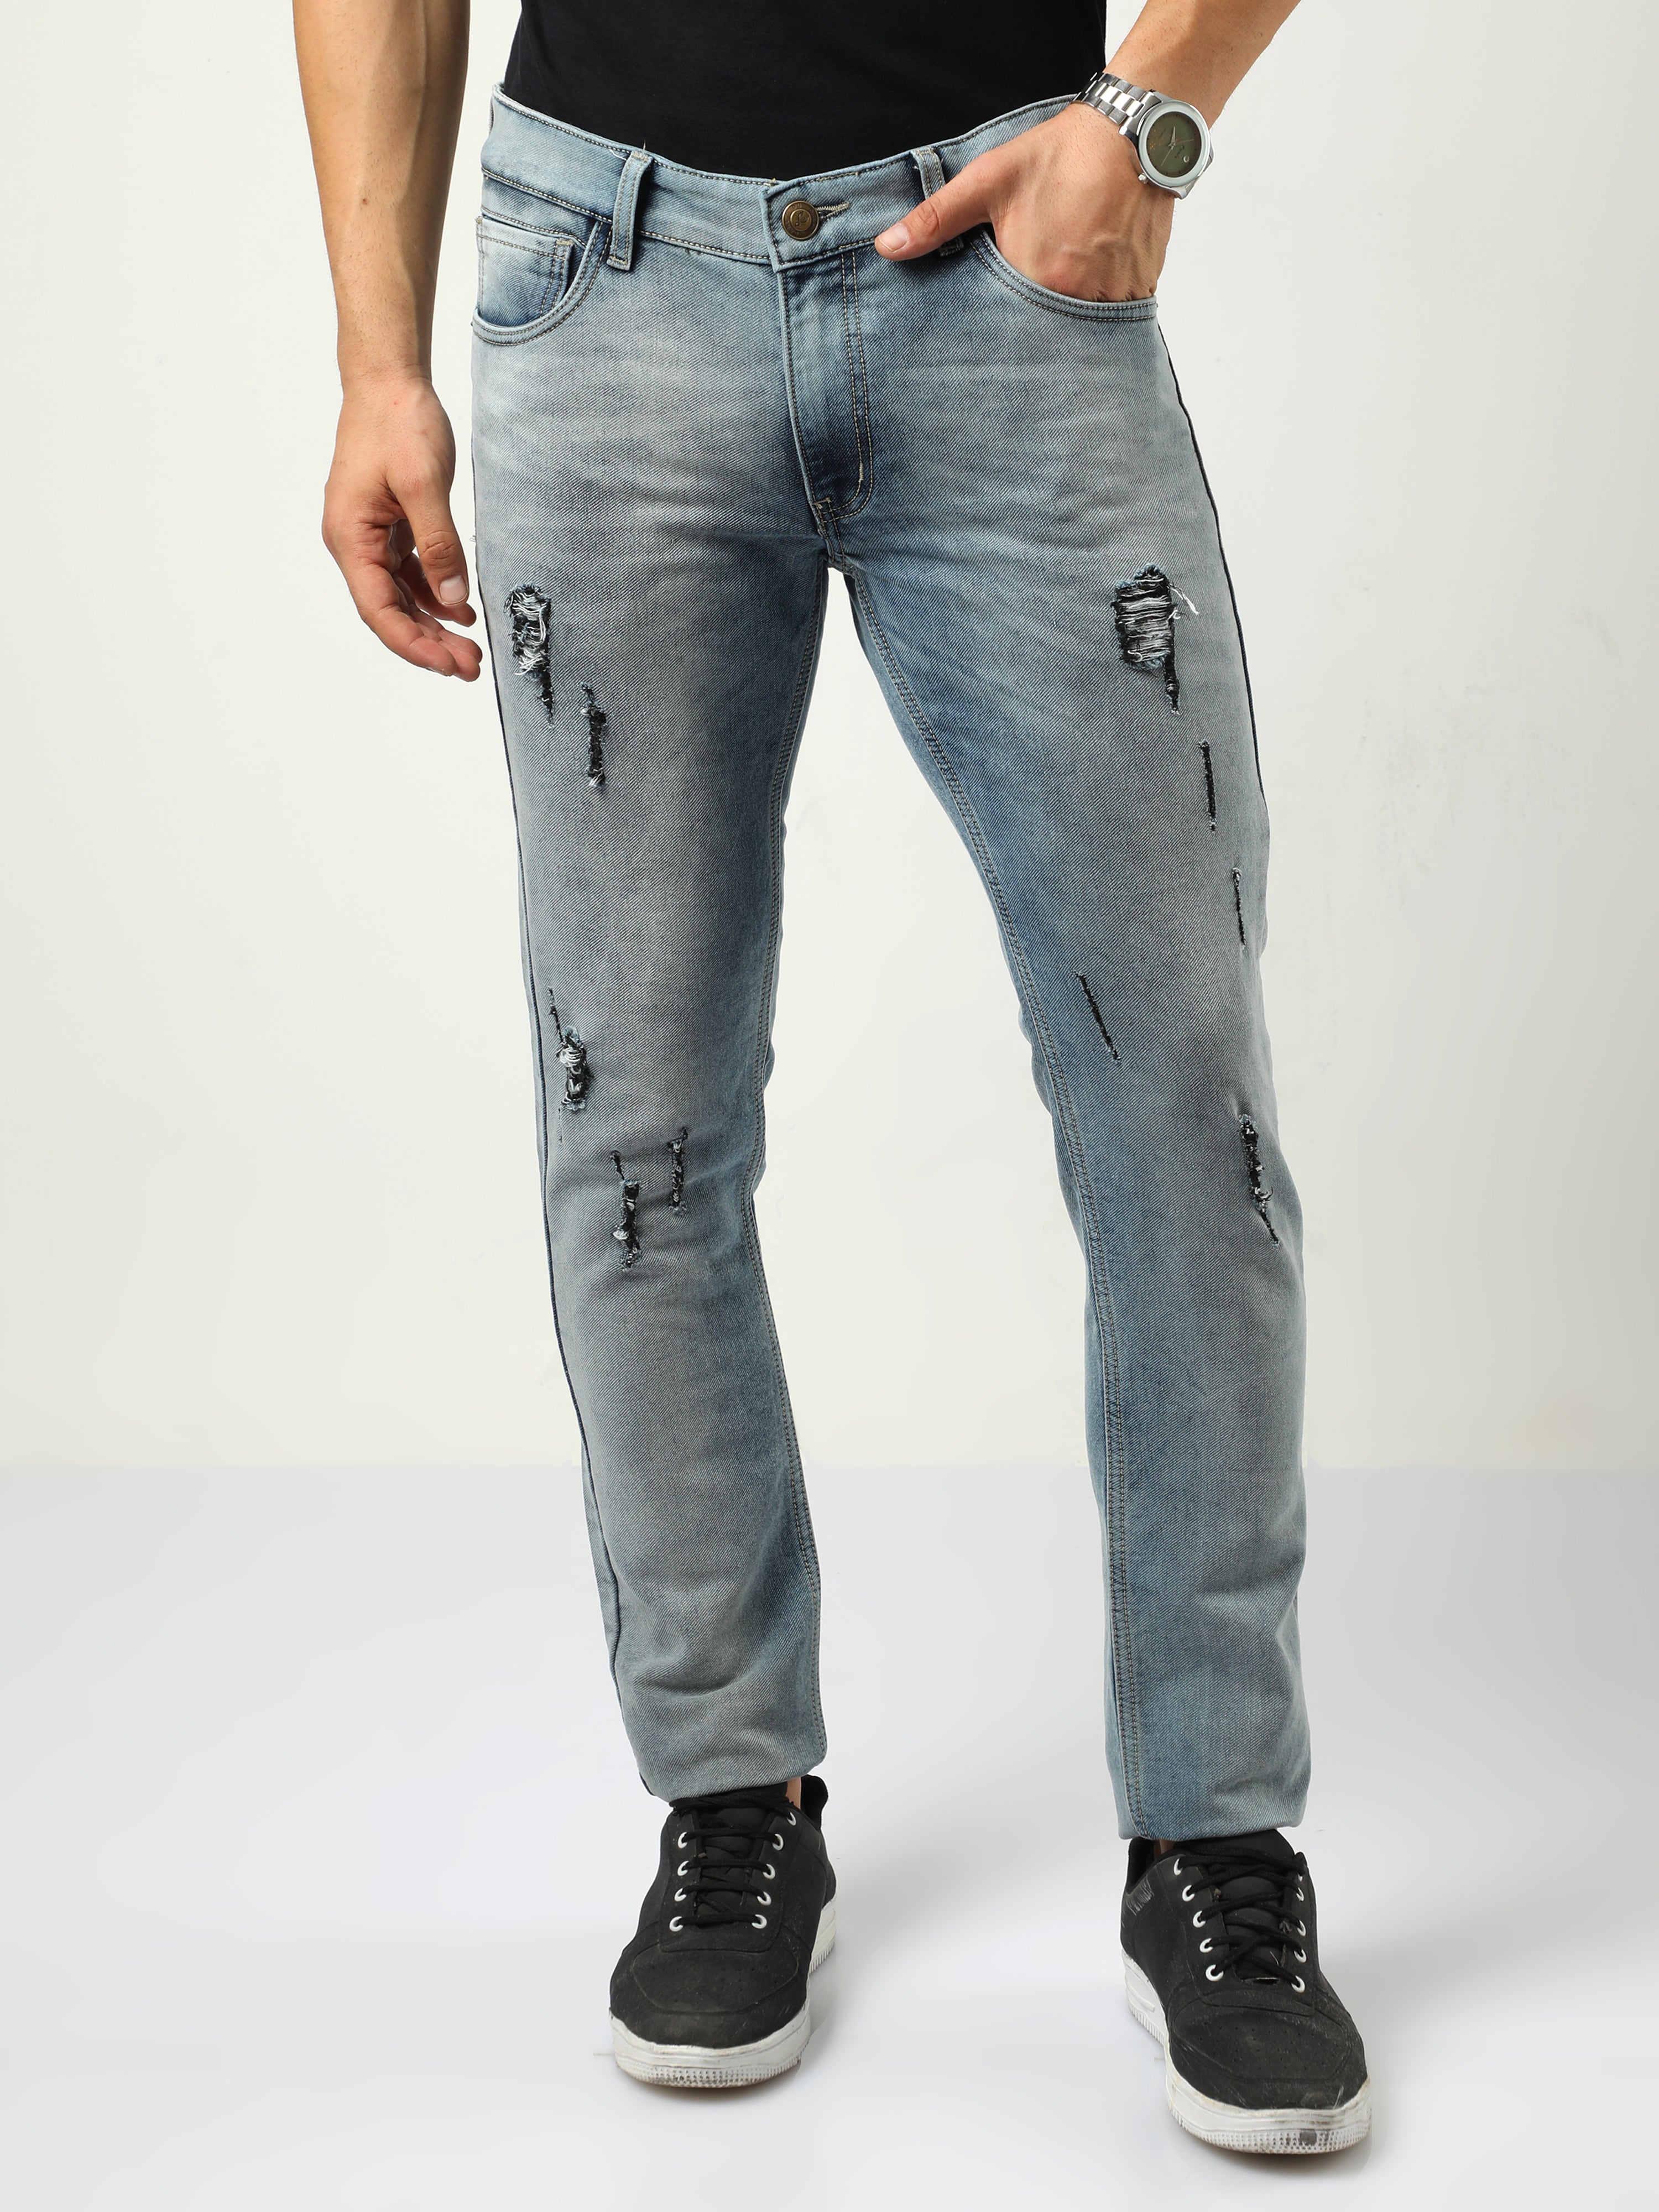 Men's Cotton TRACK PANTS | DENIM BLUE | size from M to 9XL. – Neo Garments